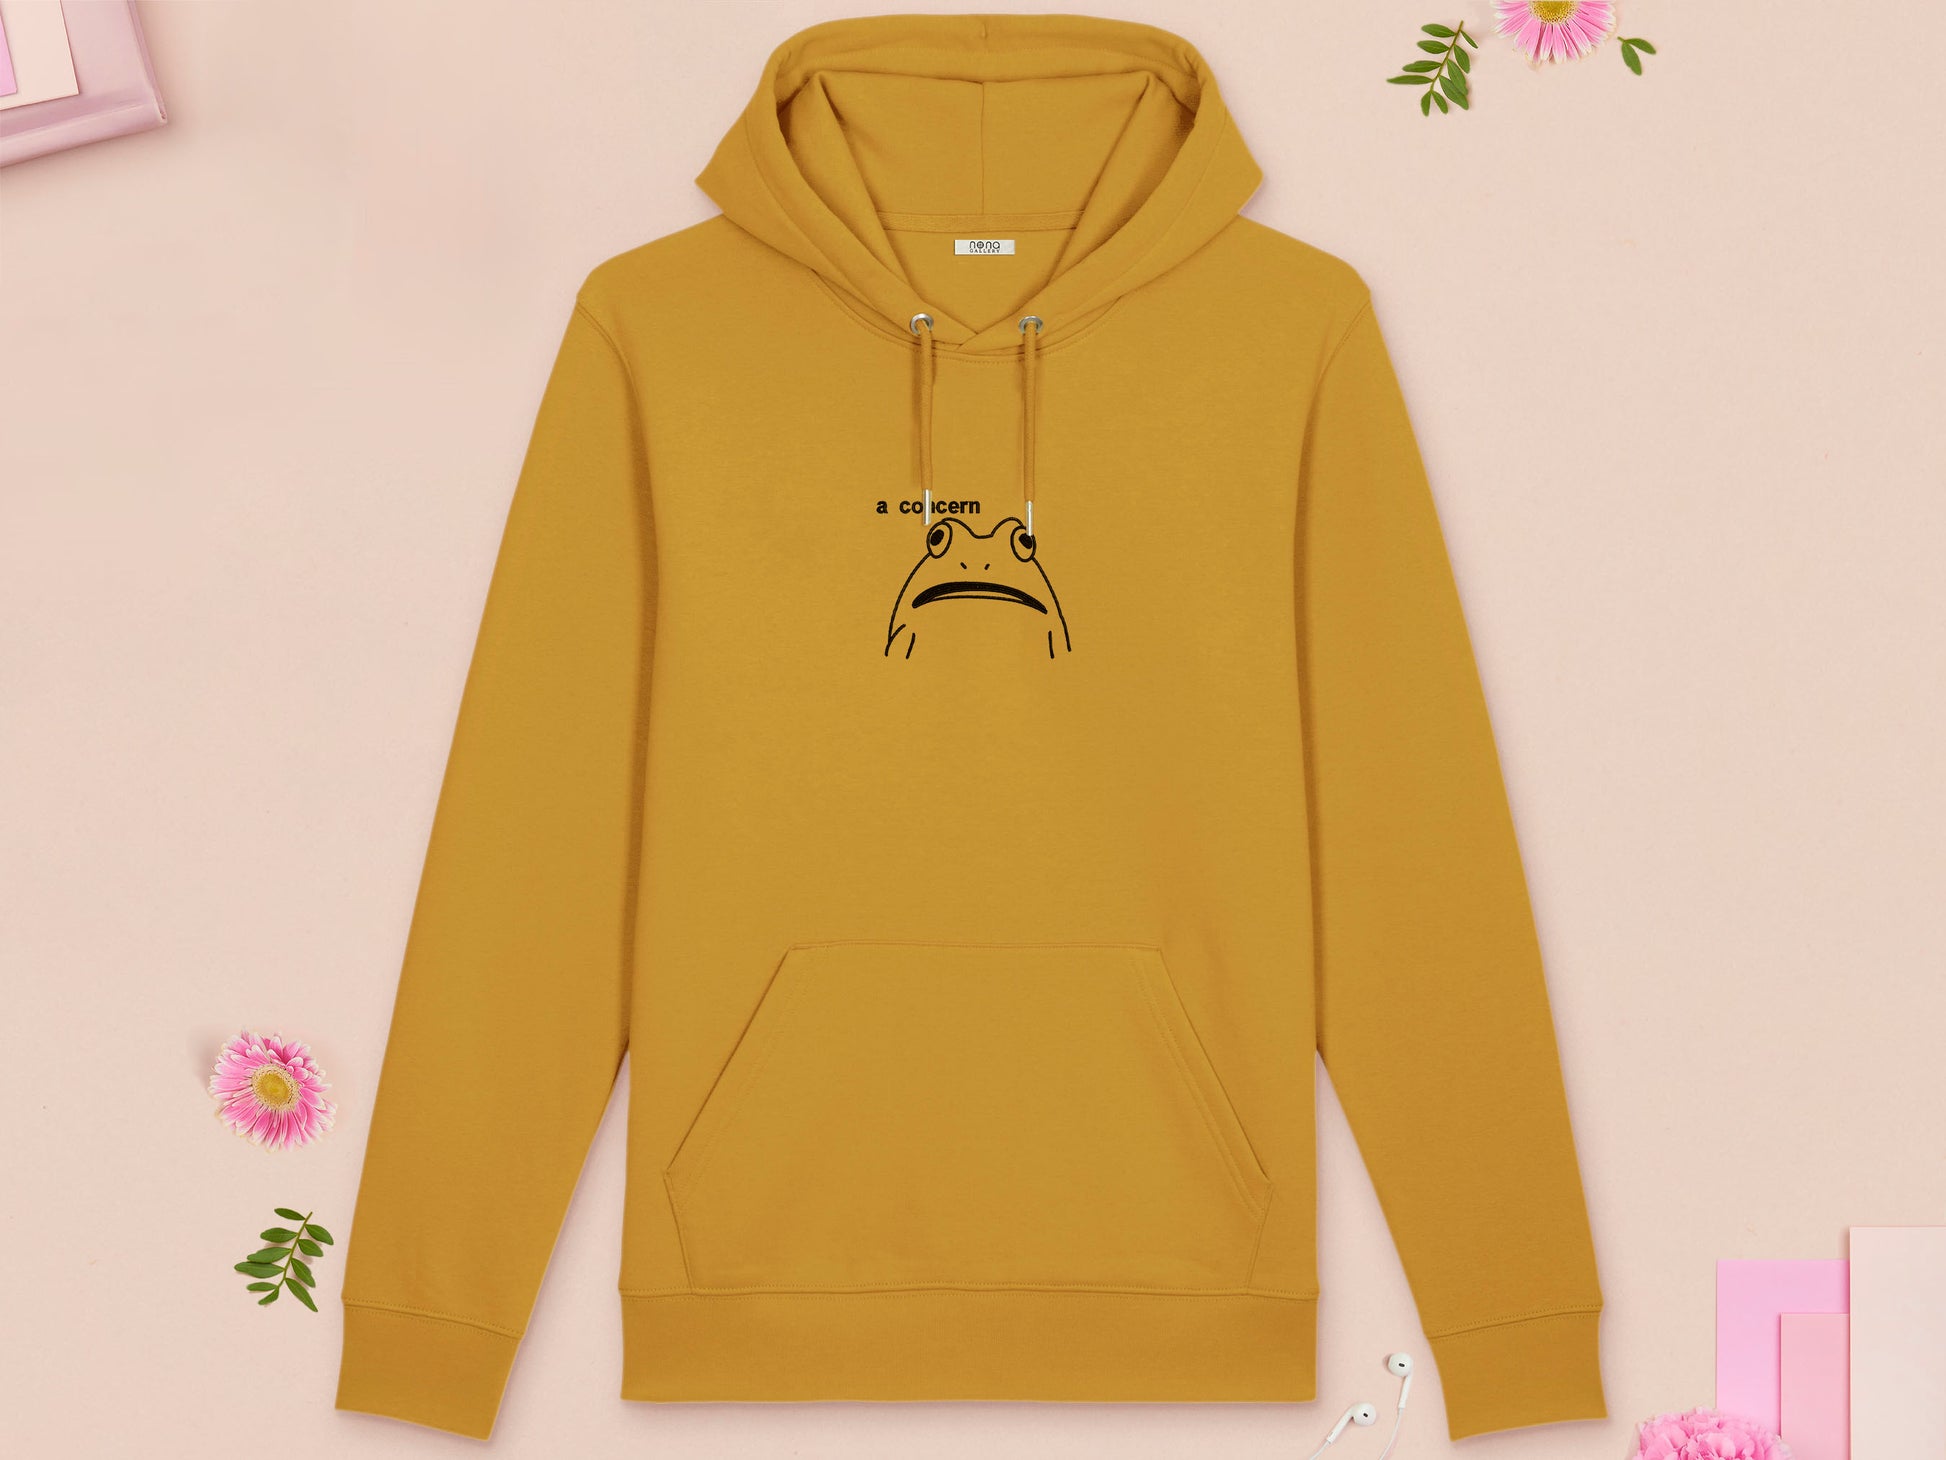 A yellow long sleeve fleece hoodie, with an embroidered black thread design of cute confused looking frog with the text a concern.